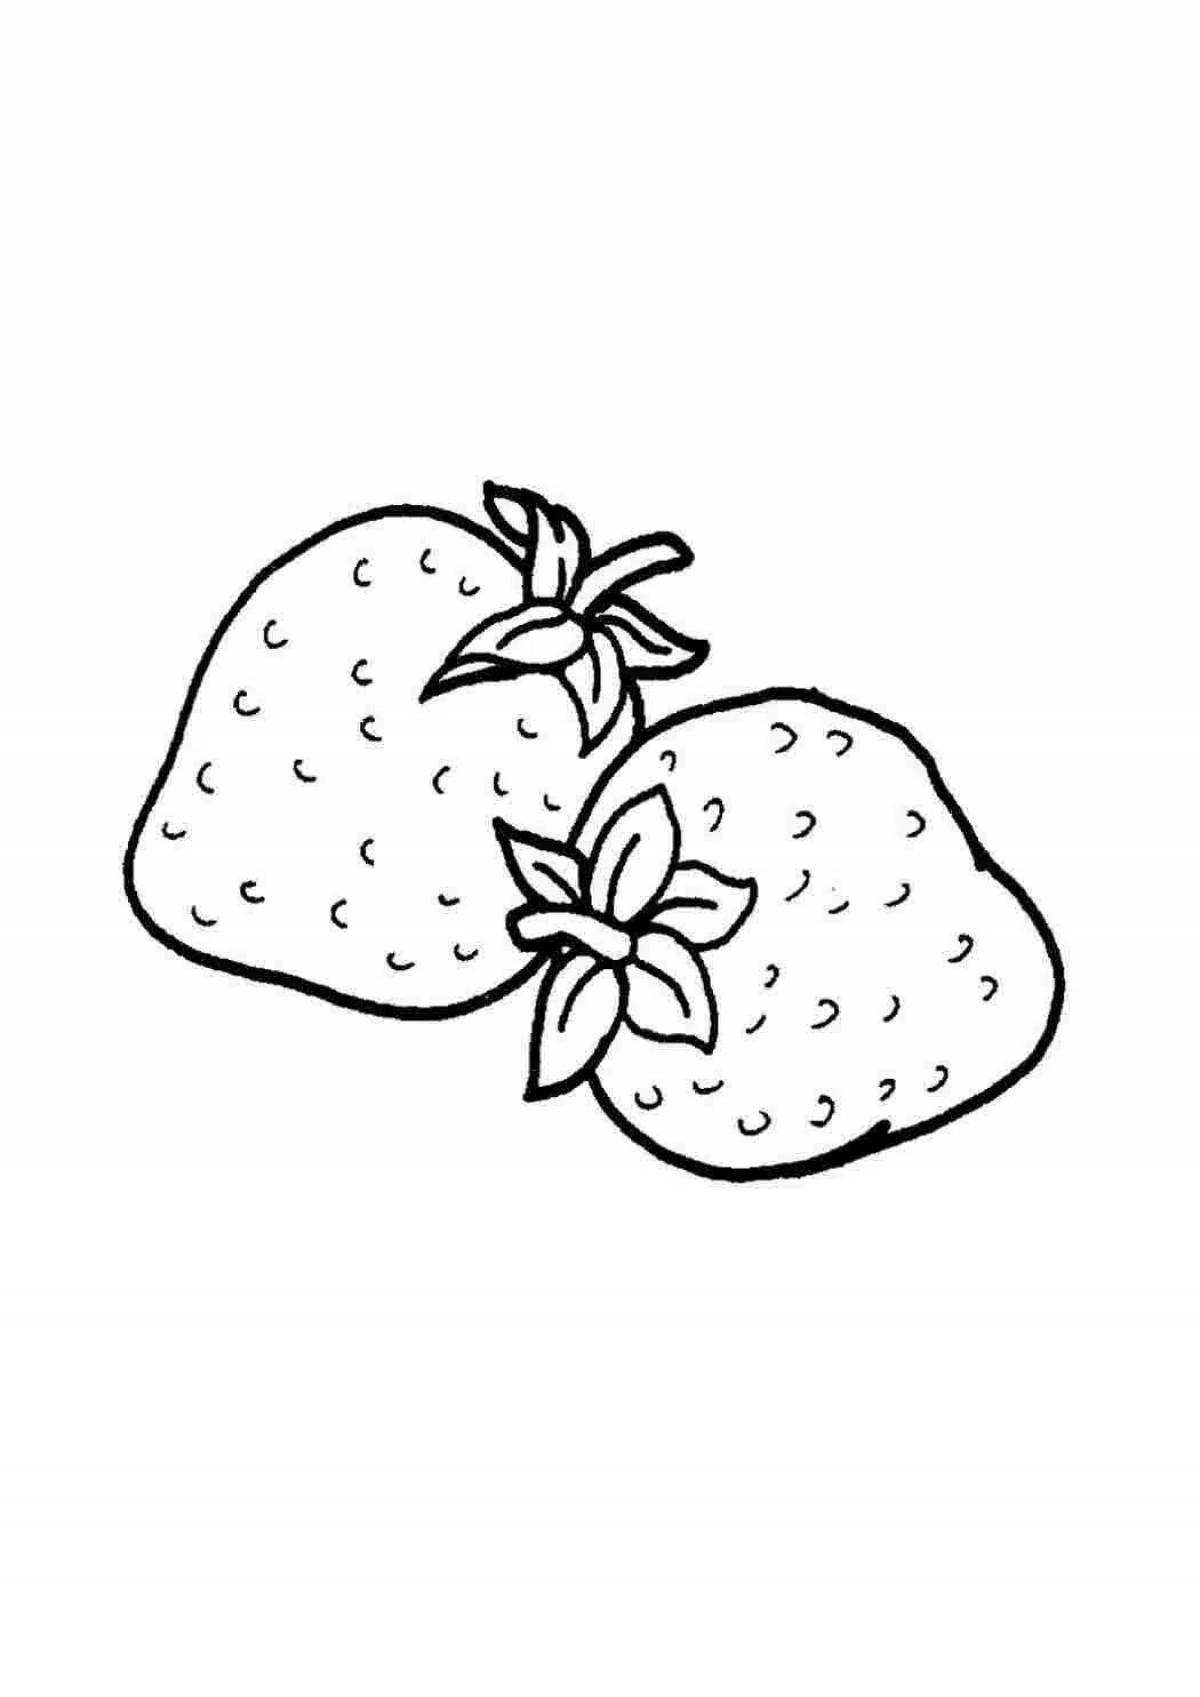 Rampant strawberry coloring book for kids